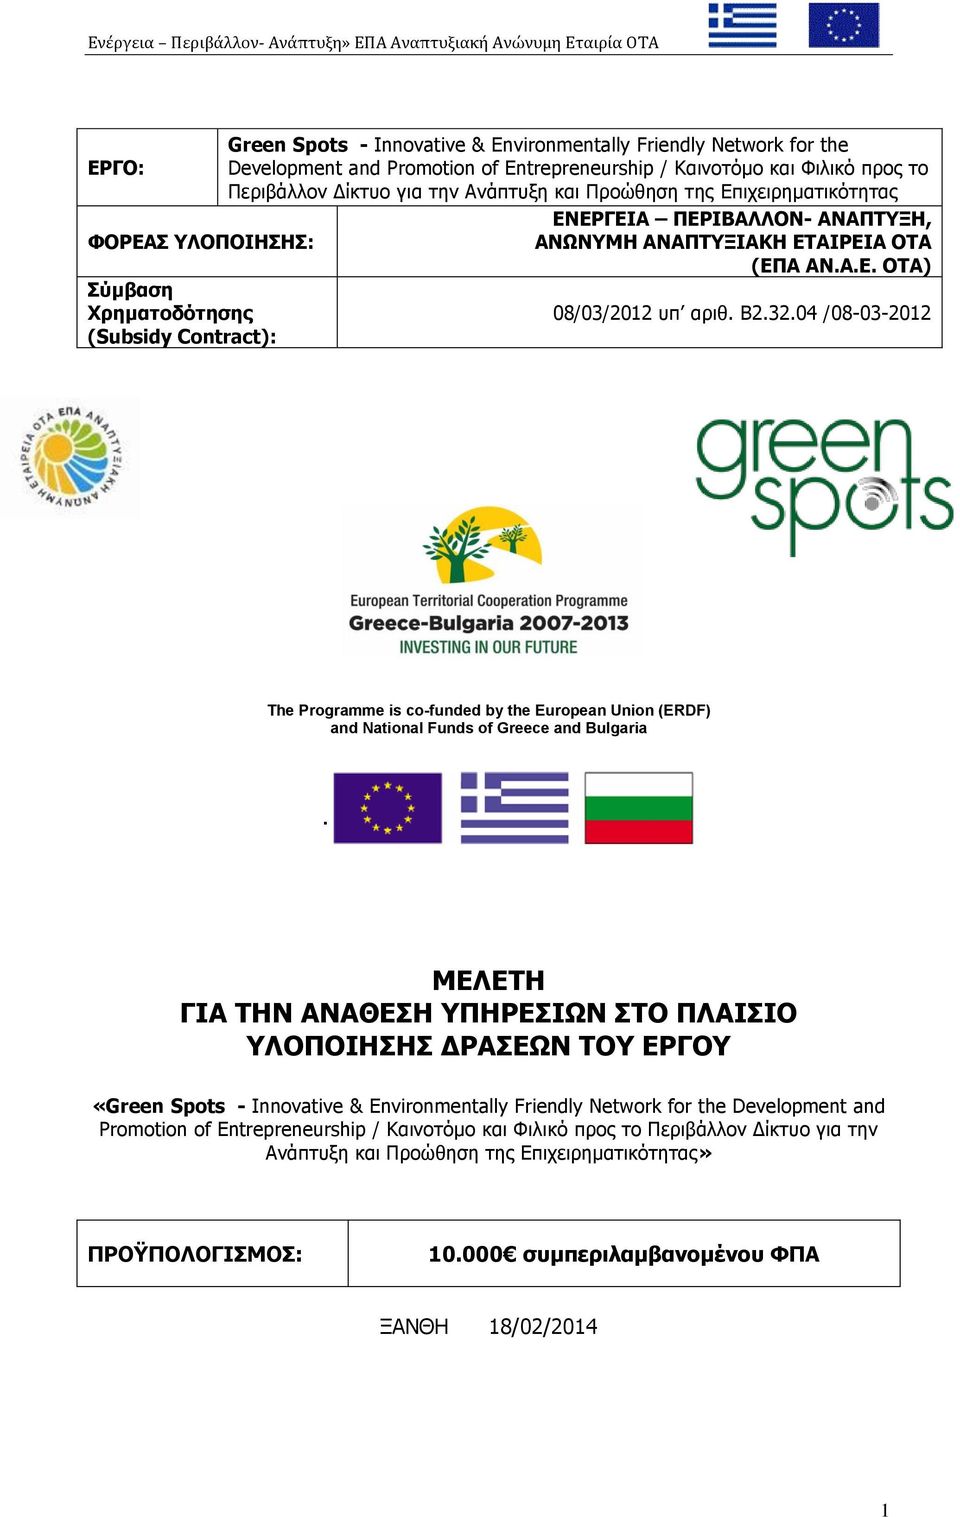 04 /08-03-2012 (Subsidy Contract): The Programme is co-funded by the European Union (ERDF) and National Funds of Greece and Bulgaria.